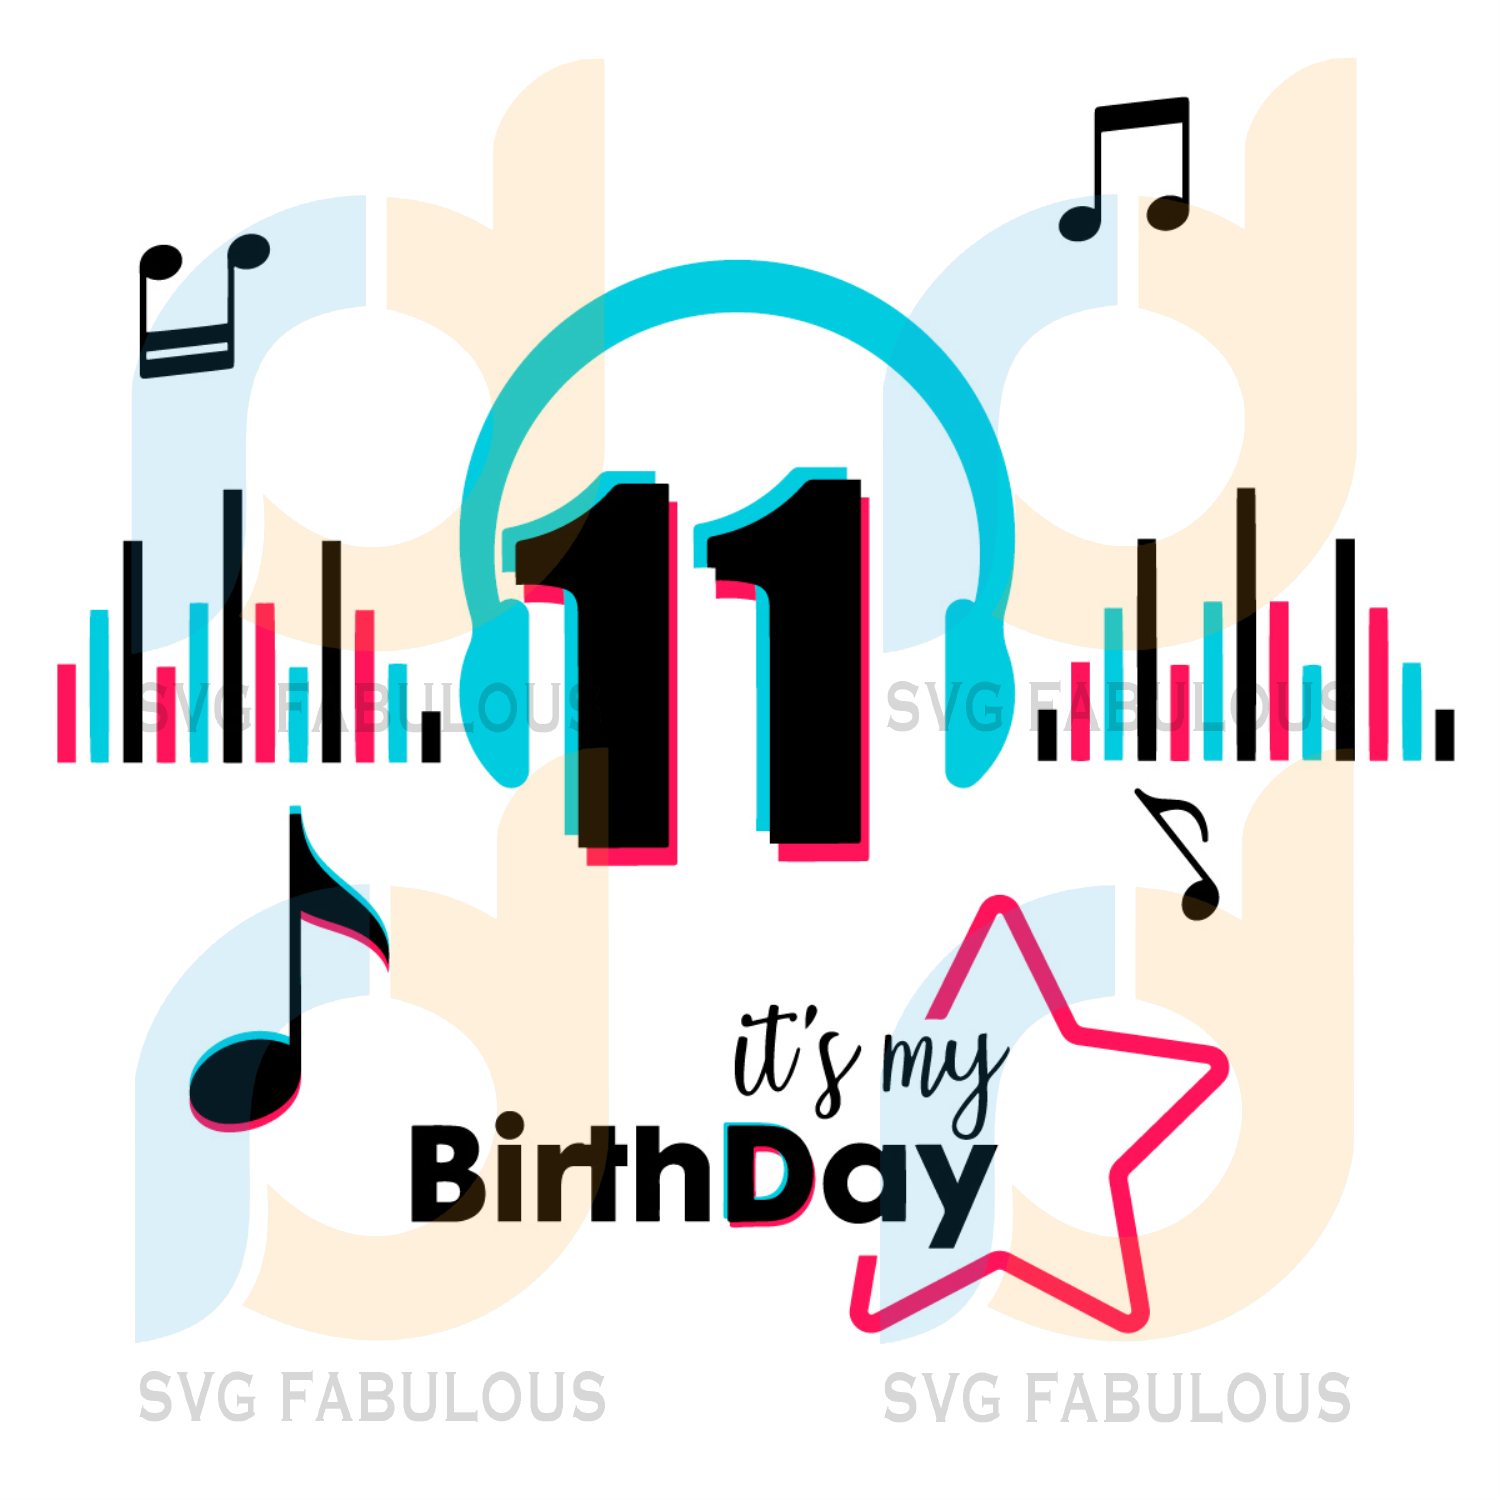 Free Free Tiktok Queen Svg Free 368 SVG PNG EPS DXF File